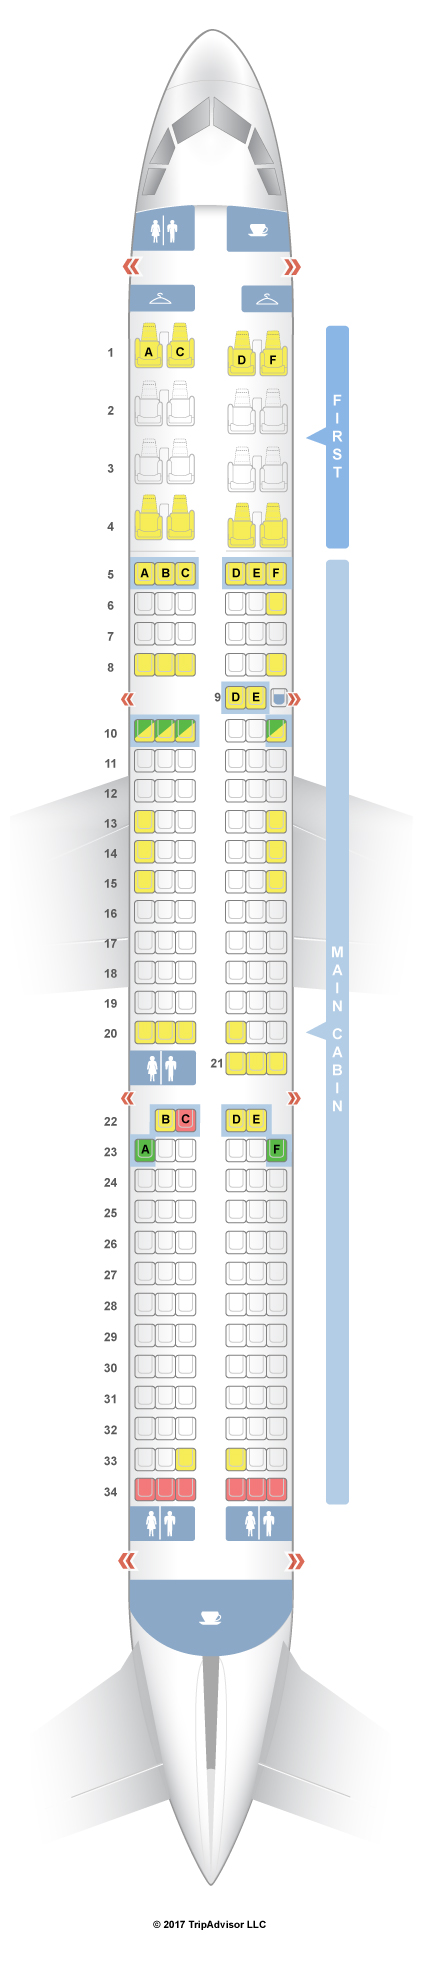 American Airlines Seating Chart A321